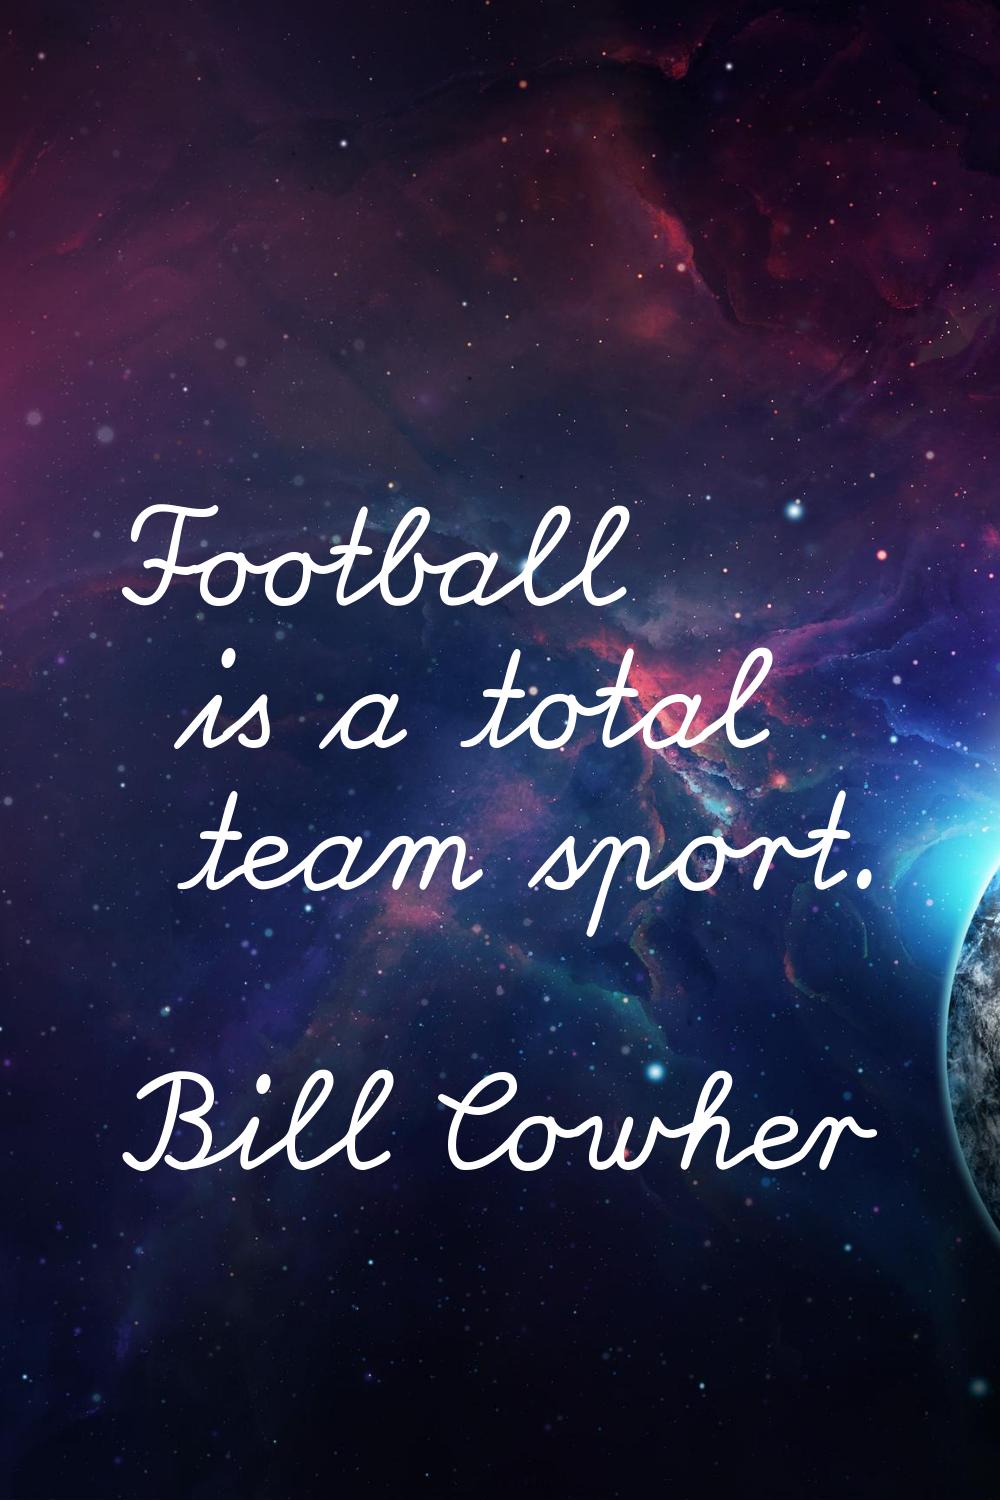 Football is a total team sport.